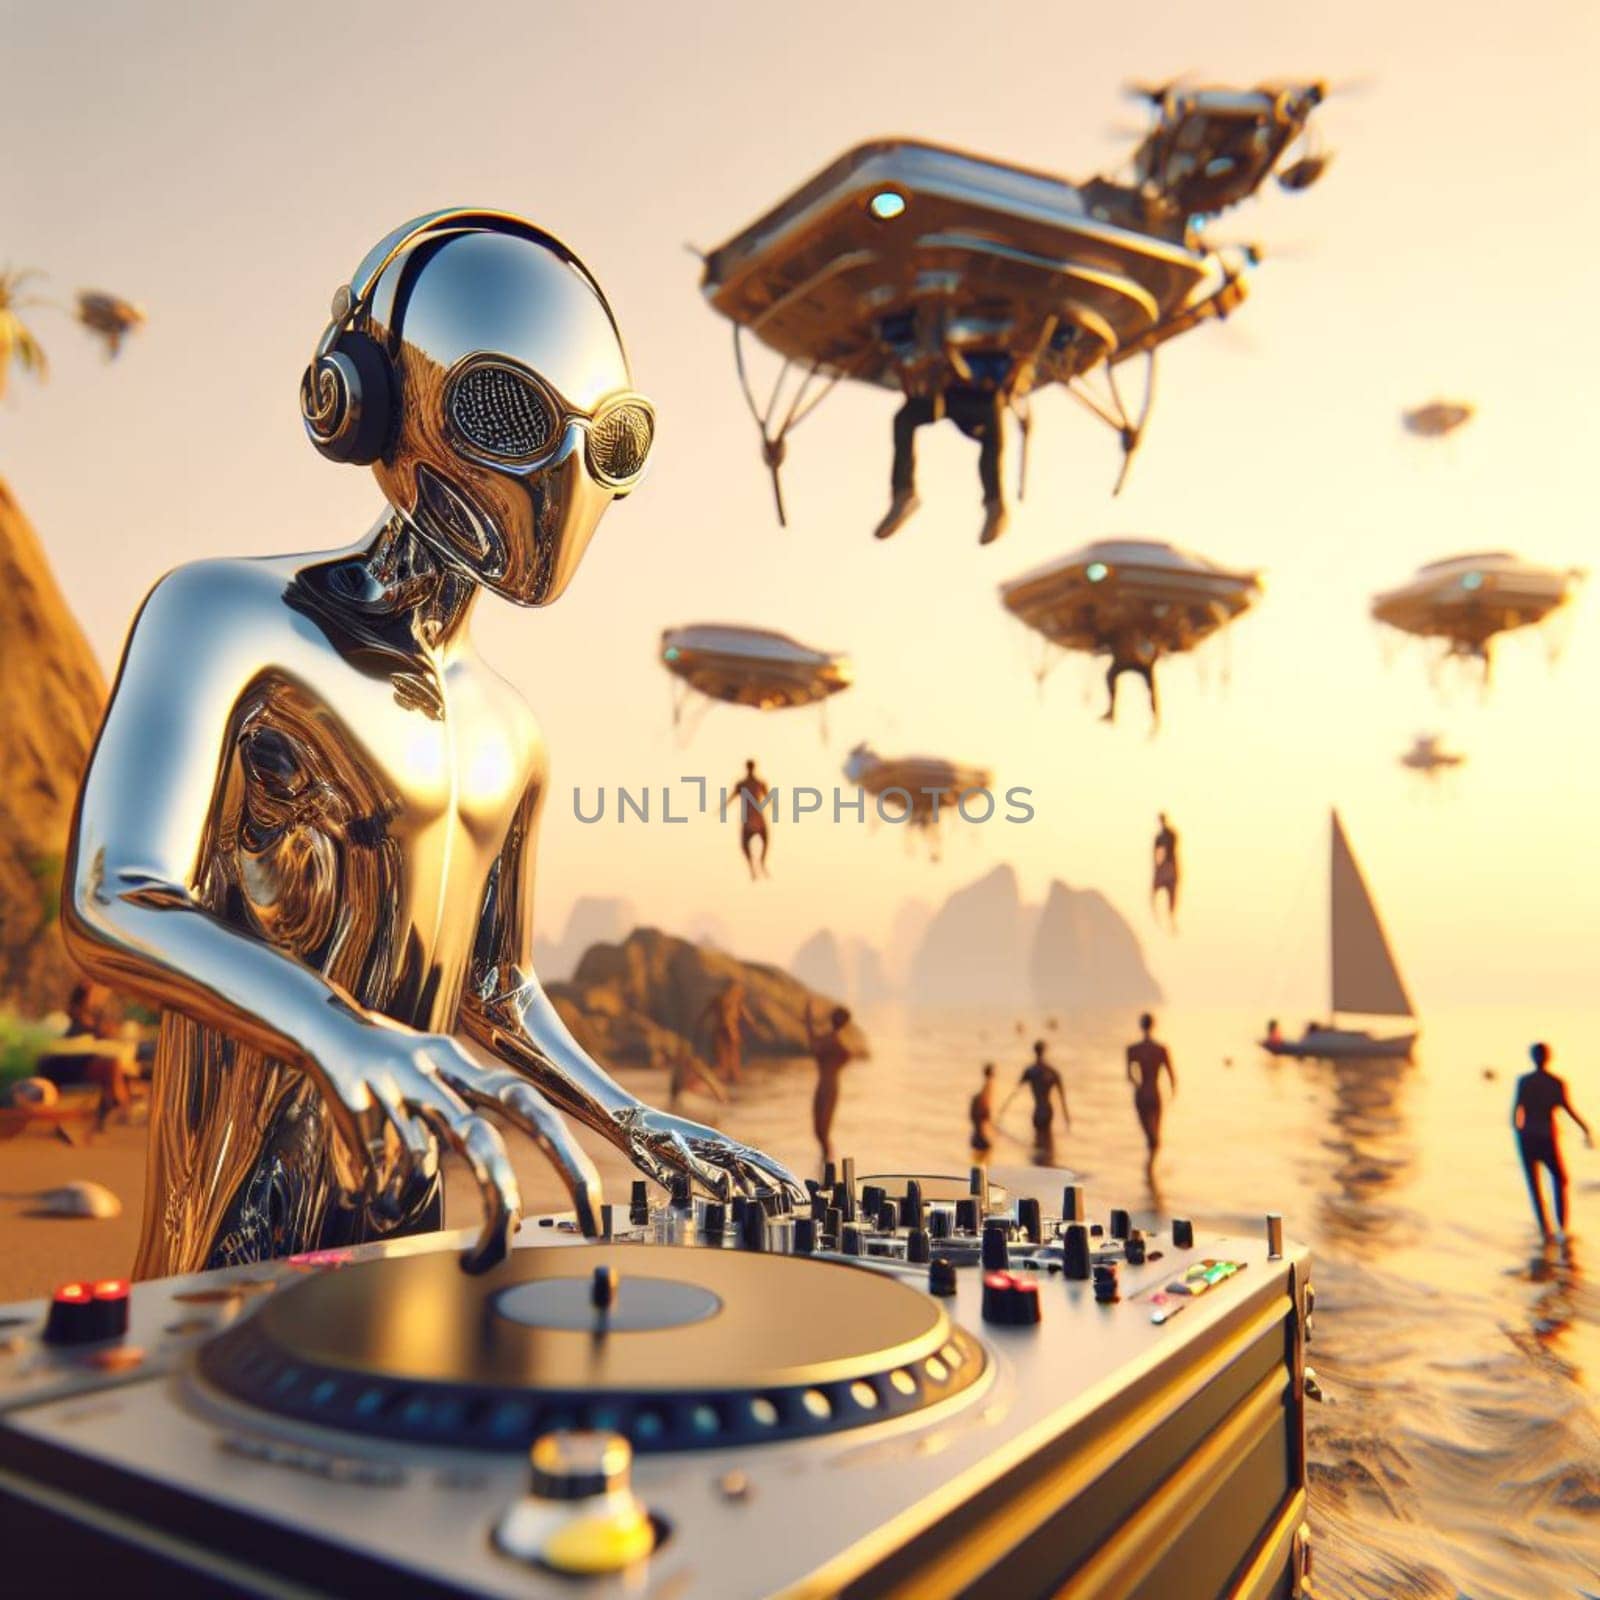 metallic alien deejay, hosting a crowded beach party in tropical island at sunset generative ai art